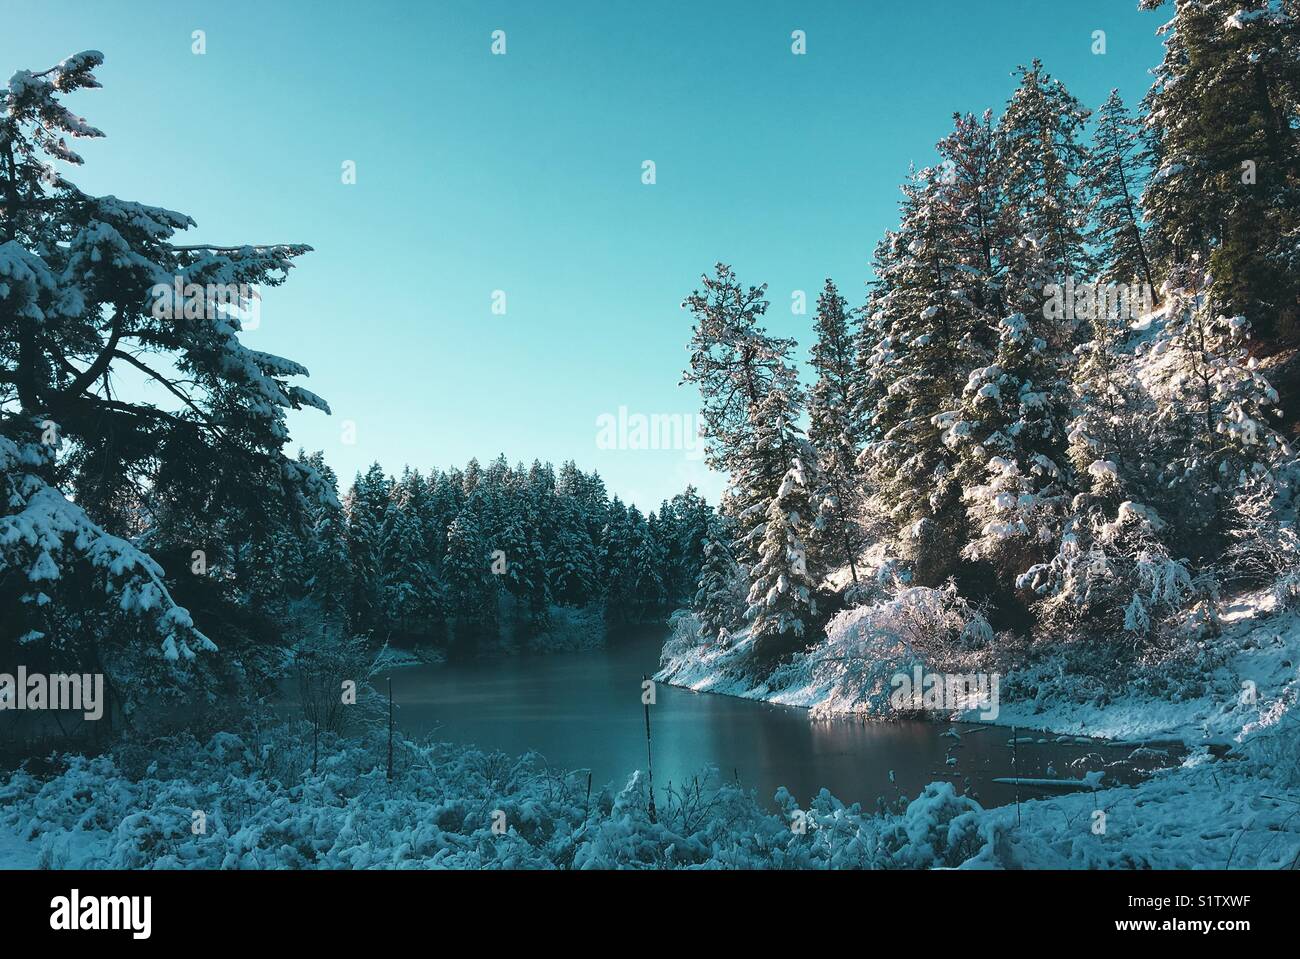 Serene snowy winter landscape. Space for copy. Stock Photo